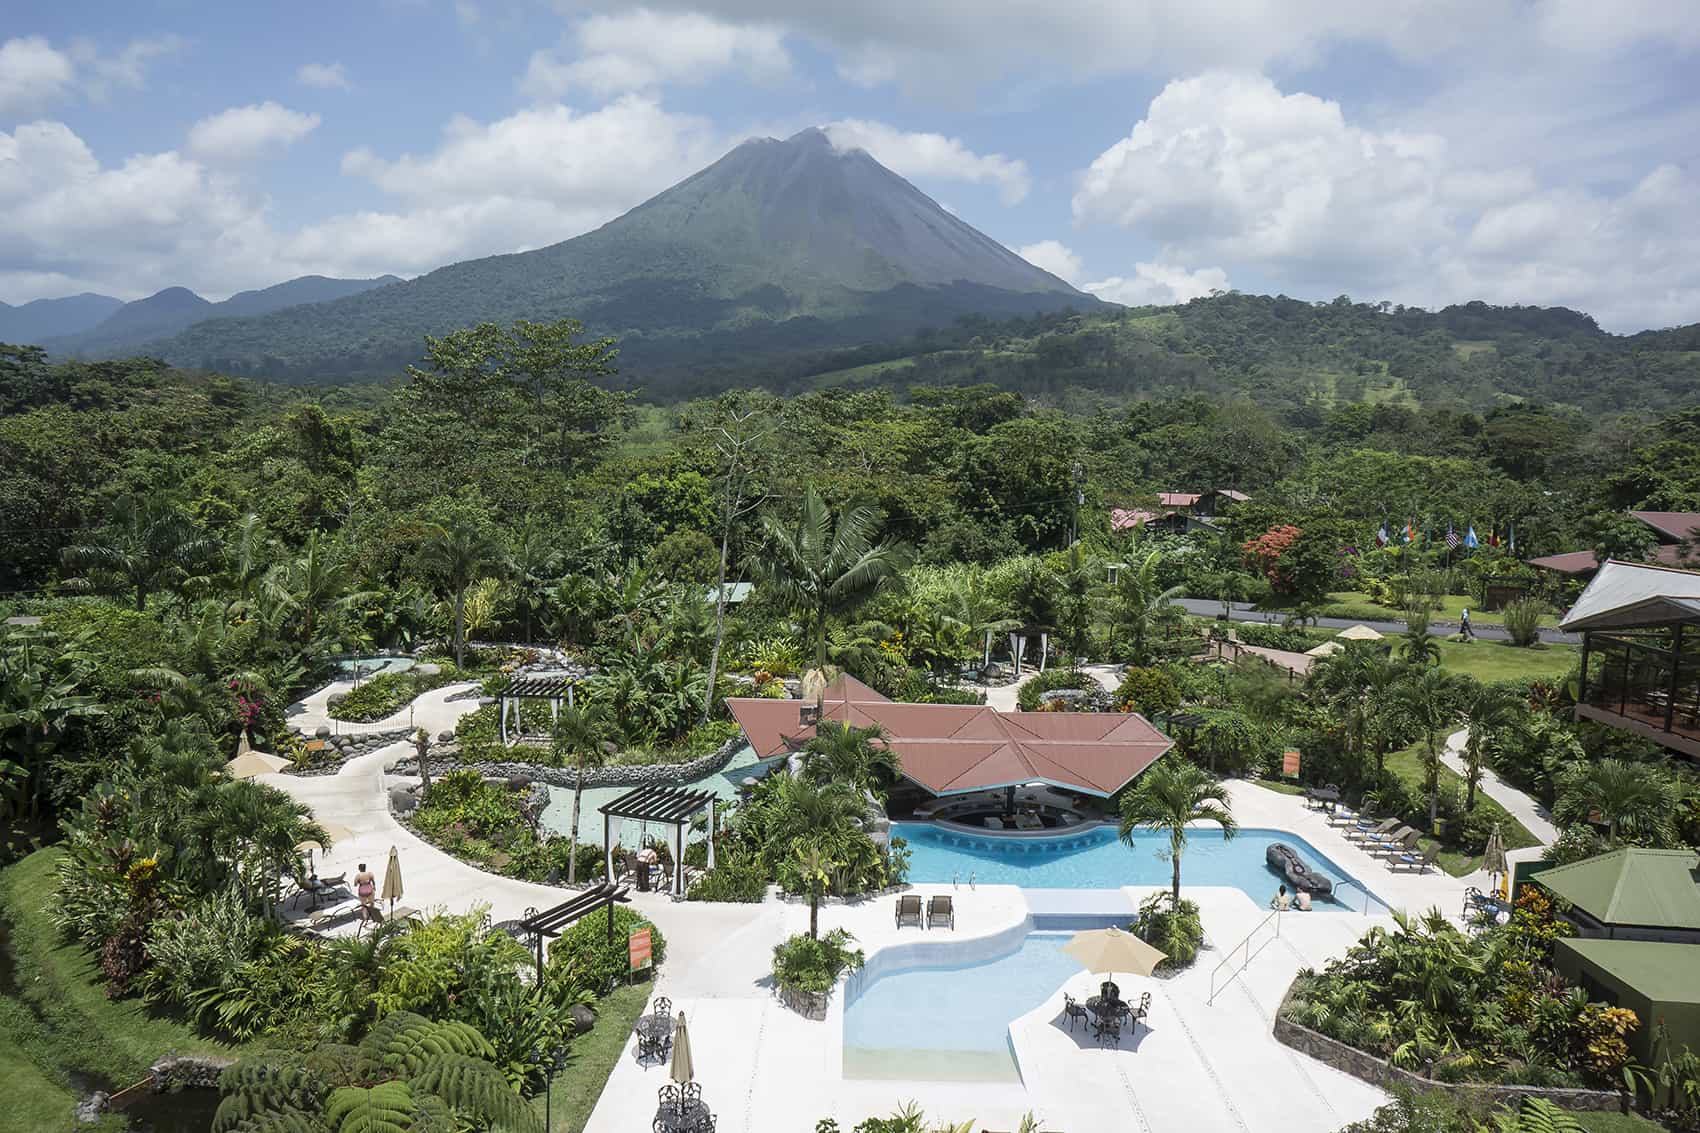 A sunny day at the Arenal Springs Hotel.